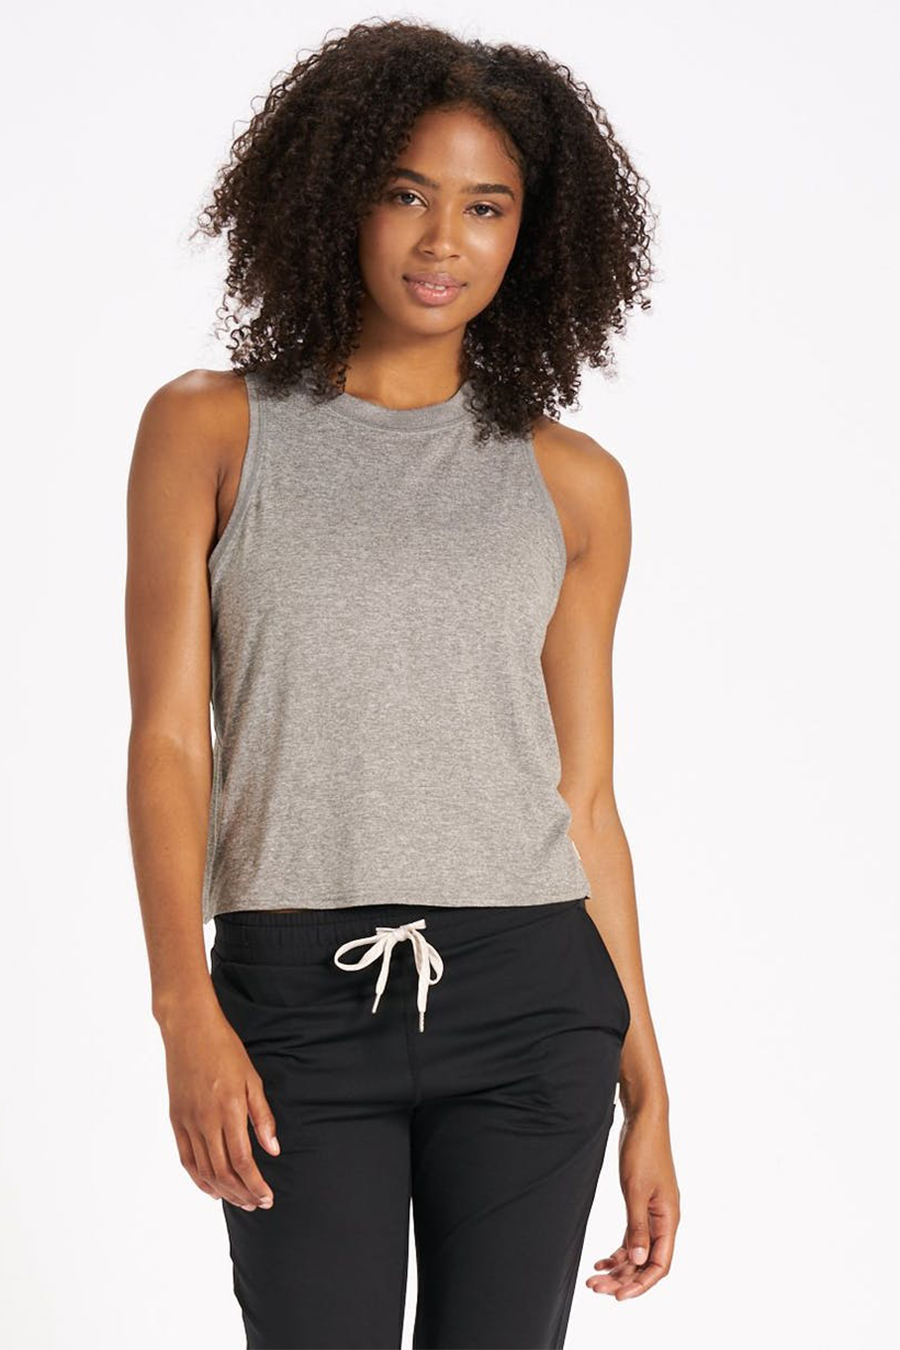 Energy Top | Heather Grey - Main Image Number 1 of 1